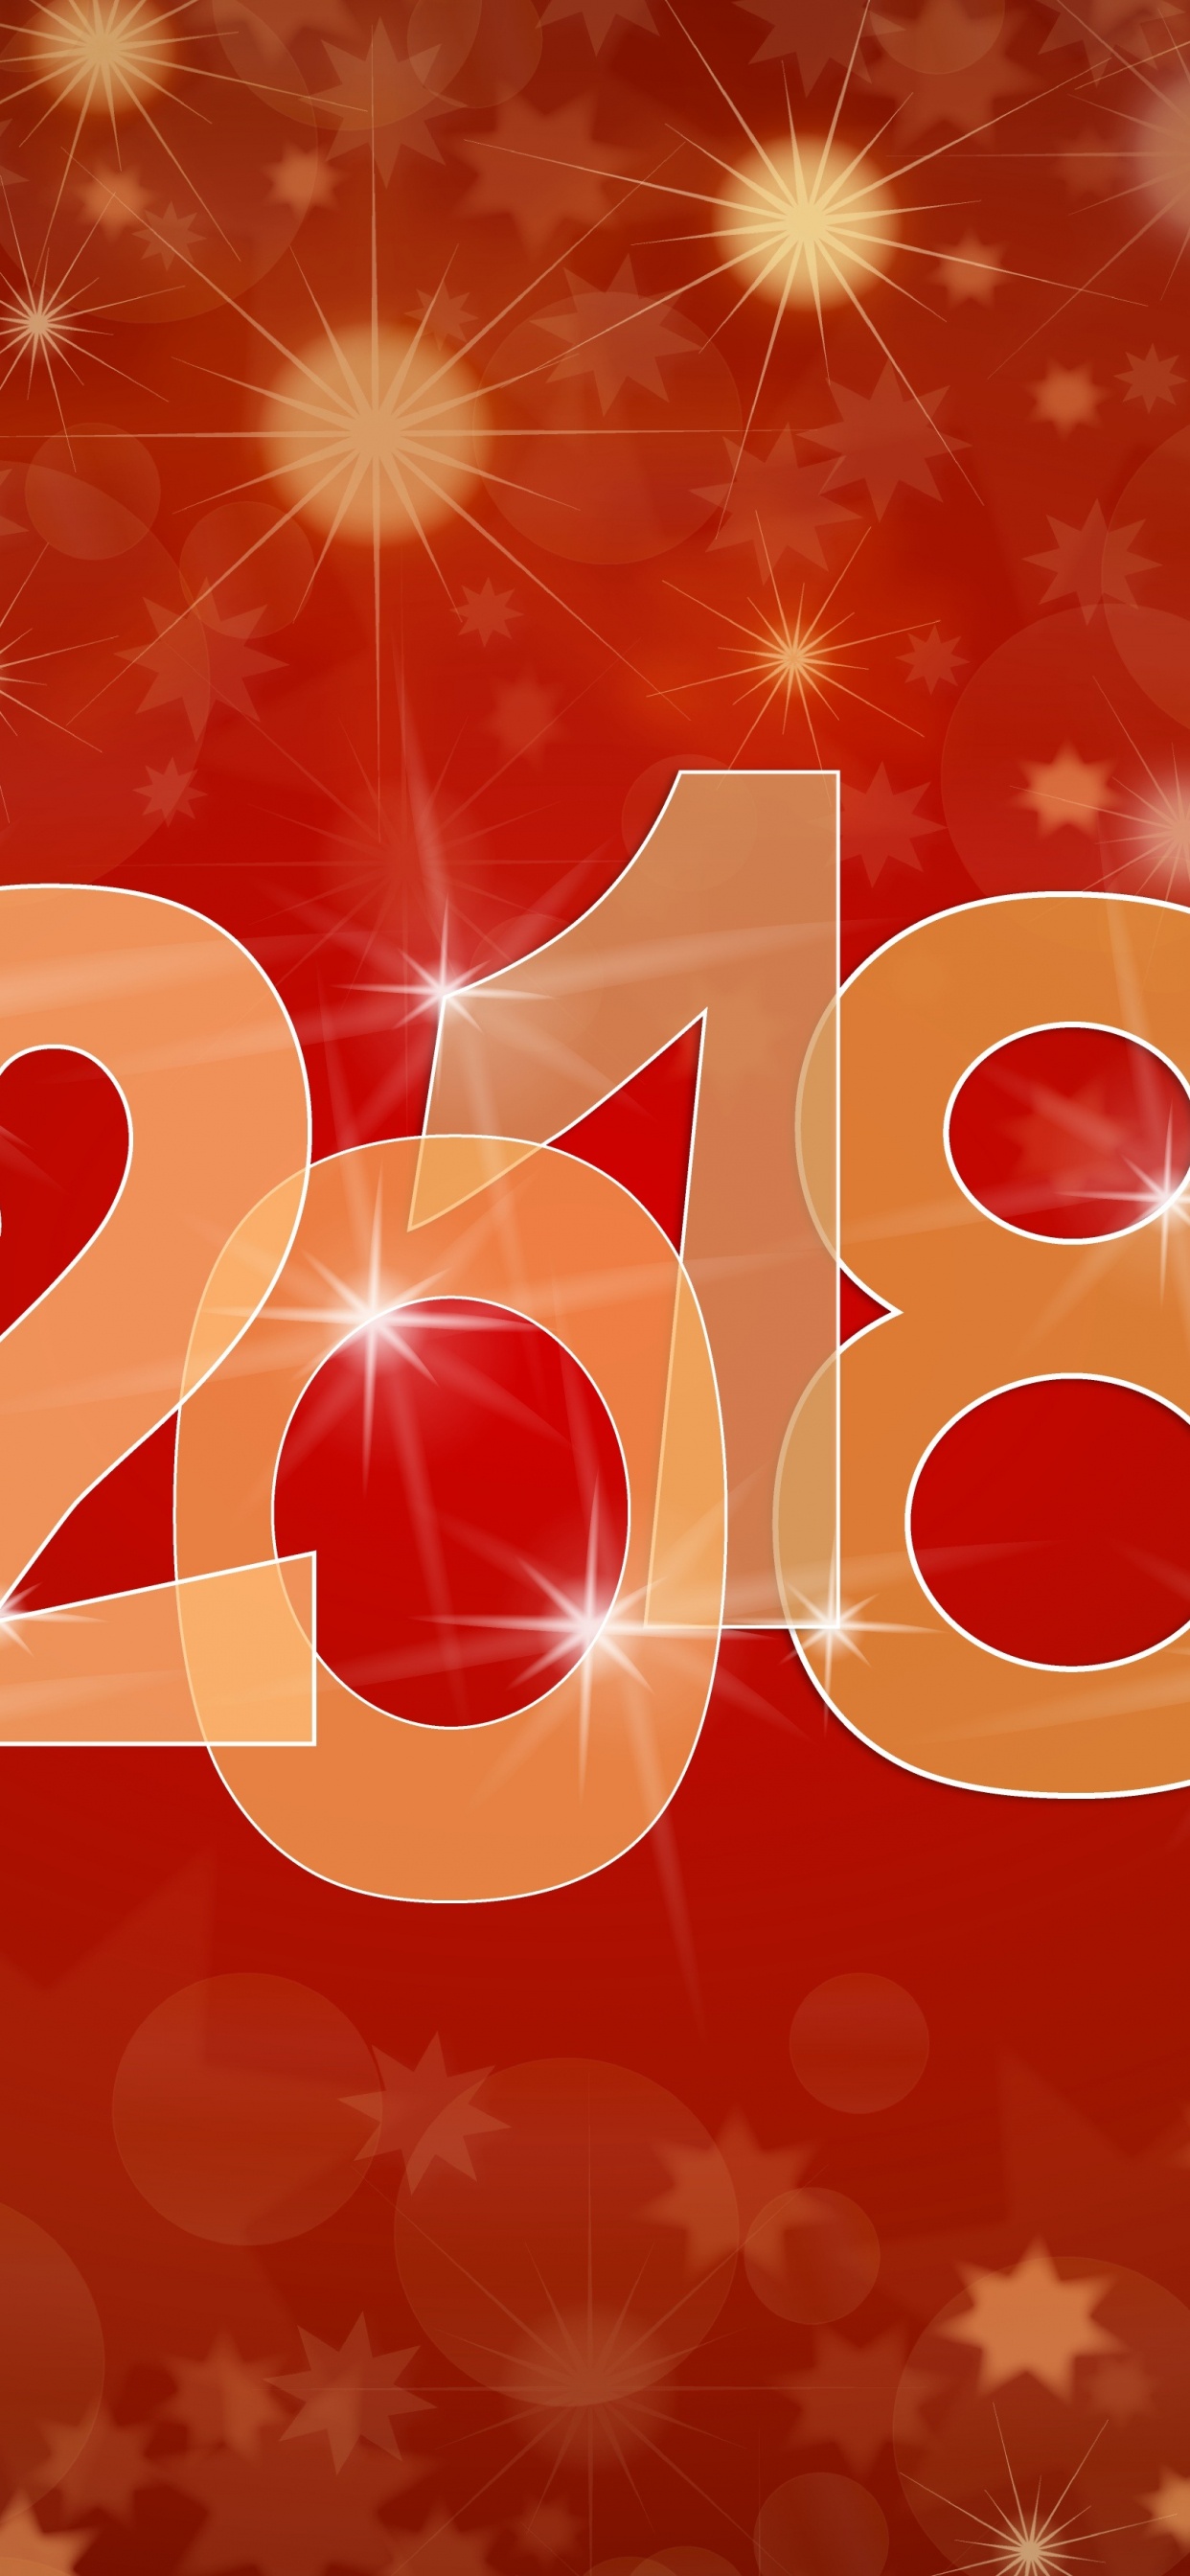 New Year, Chinese New Year, Text, Heart, New Years Day. Wallpaper in 1242x2688 Resolution